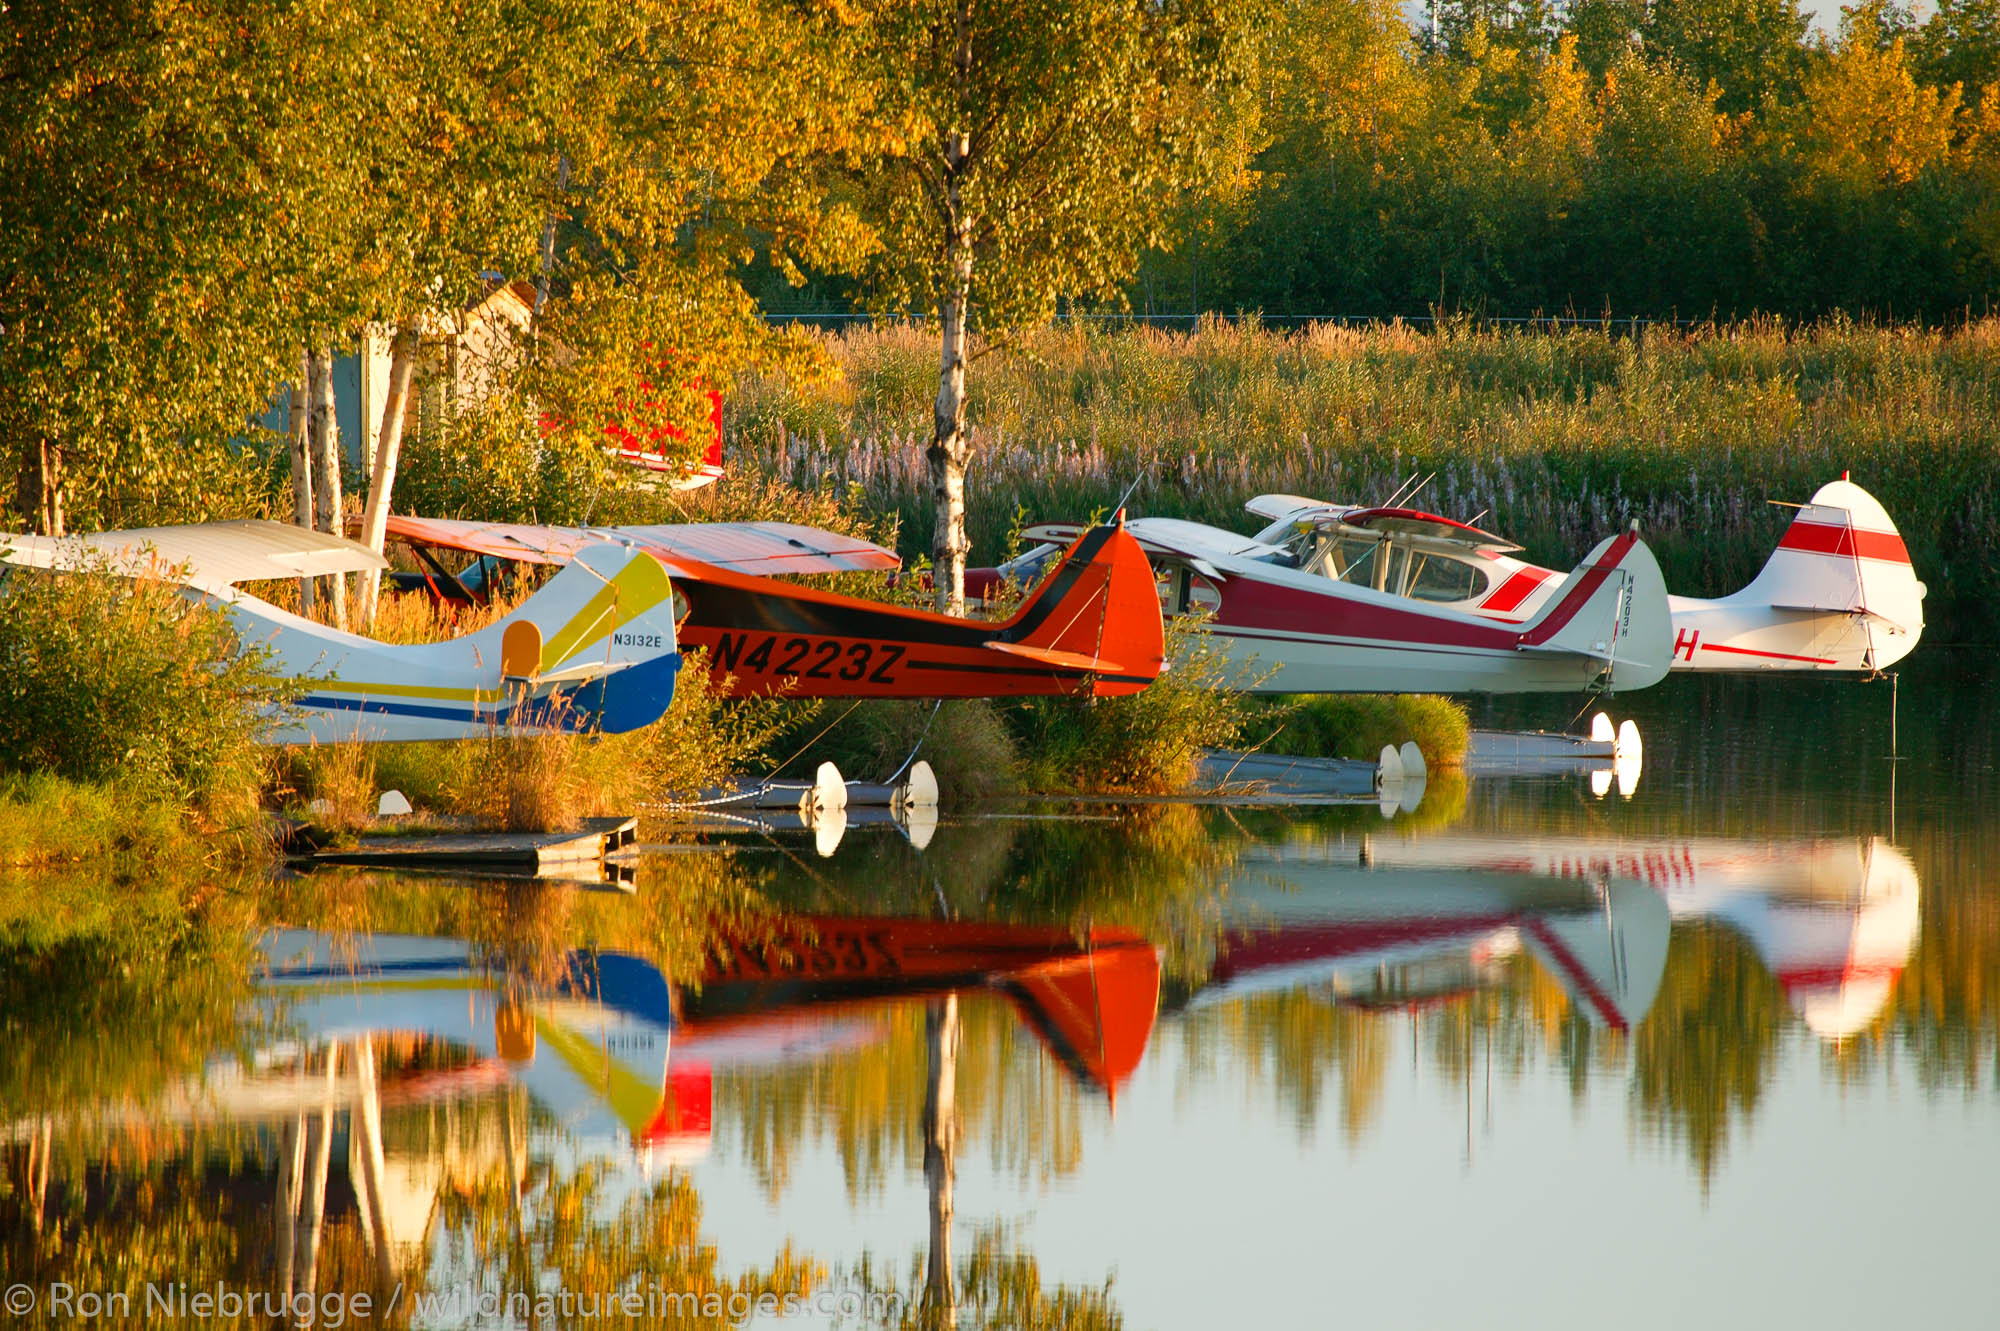 Float planes on Lake Hood, Anchorage, Alaska.  Lake Hood is the world's largest and busiest seaplane base.